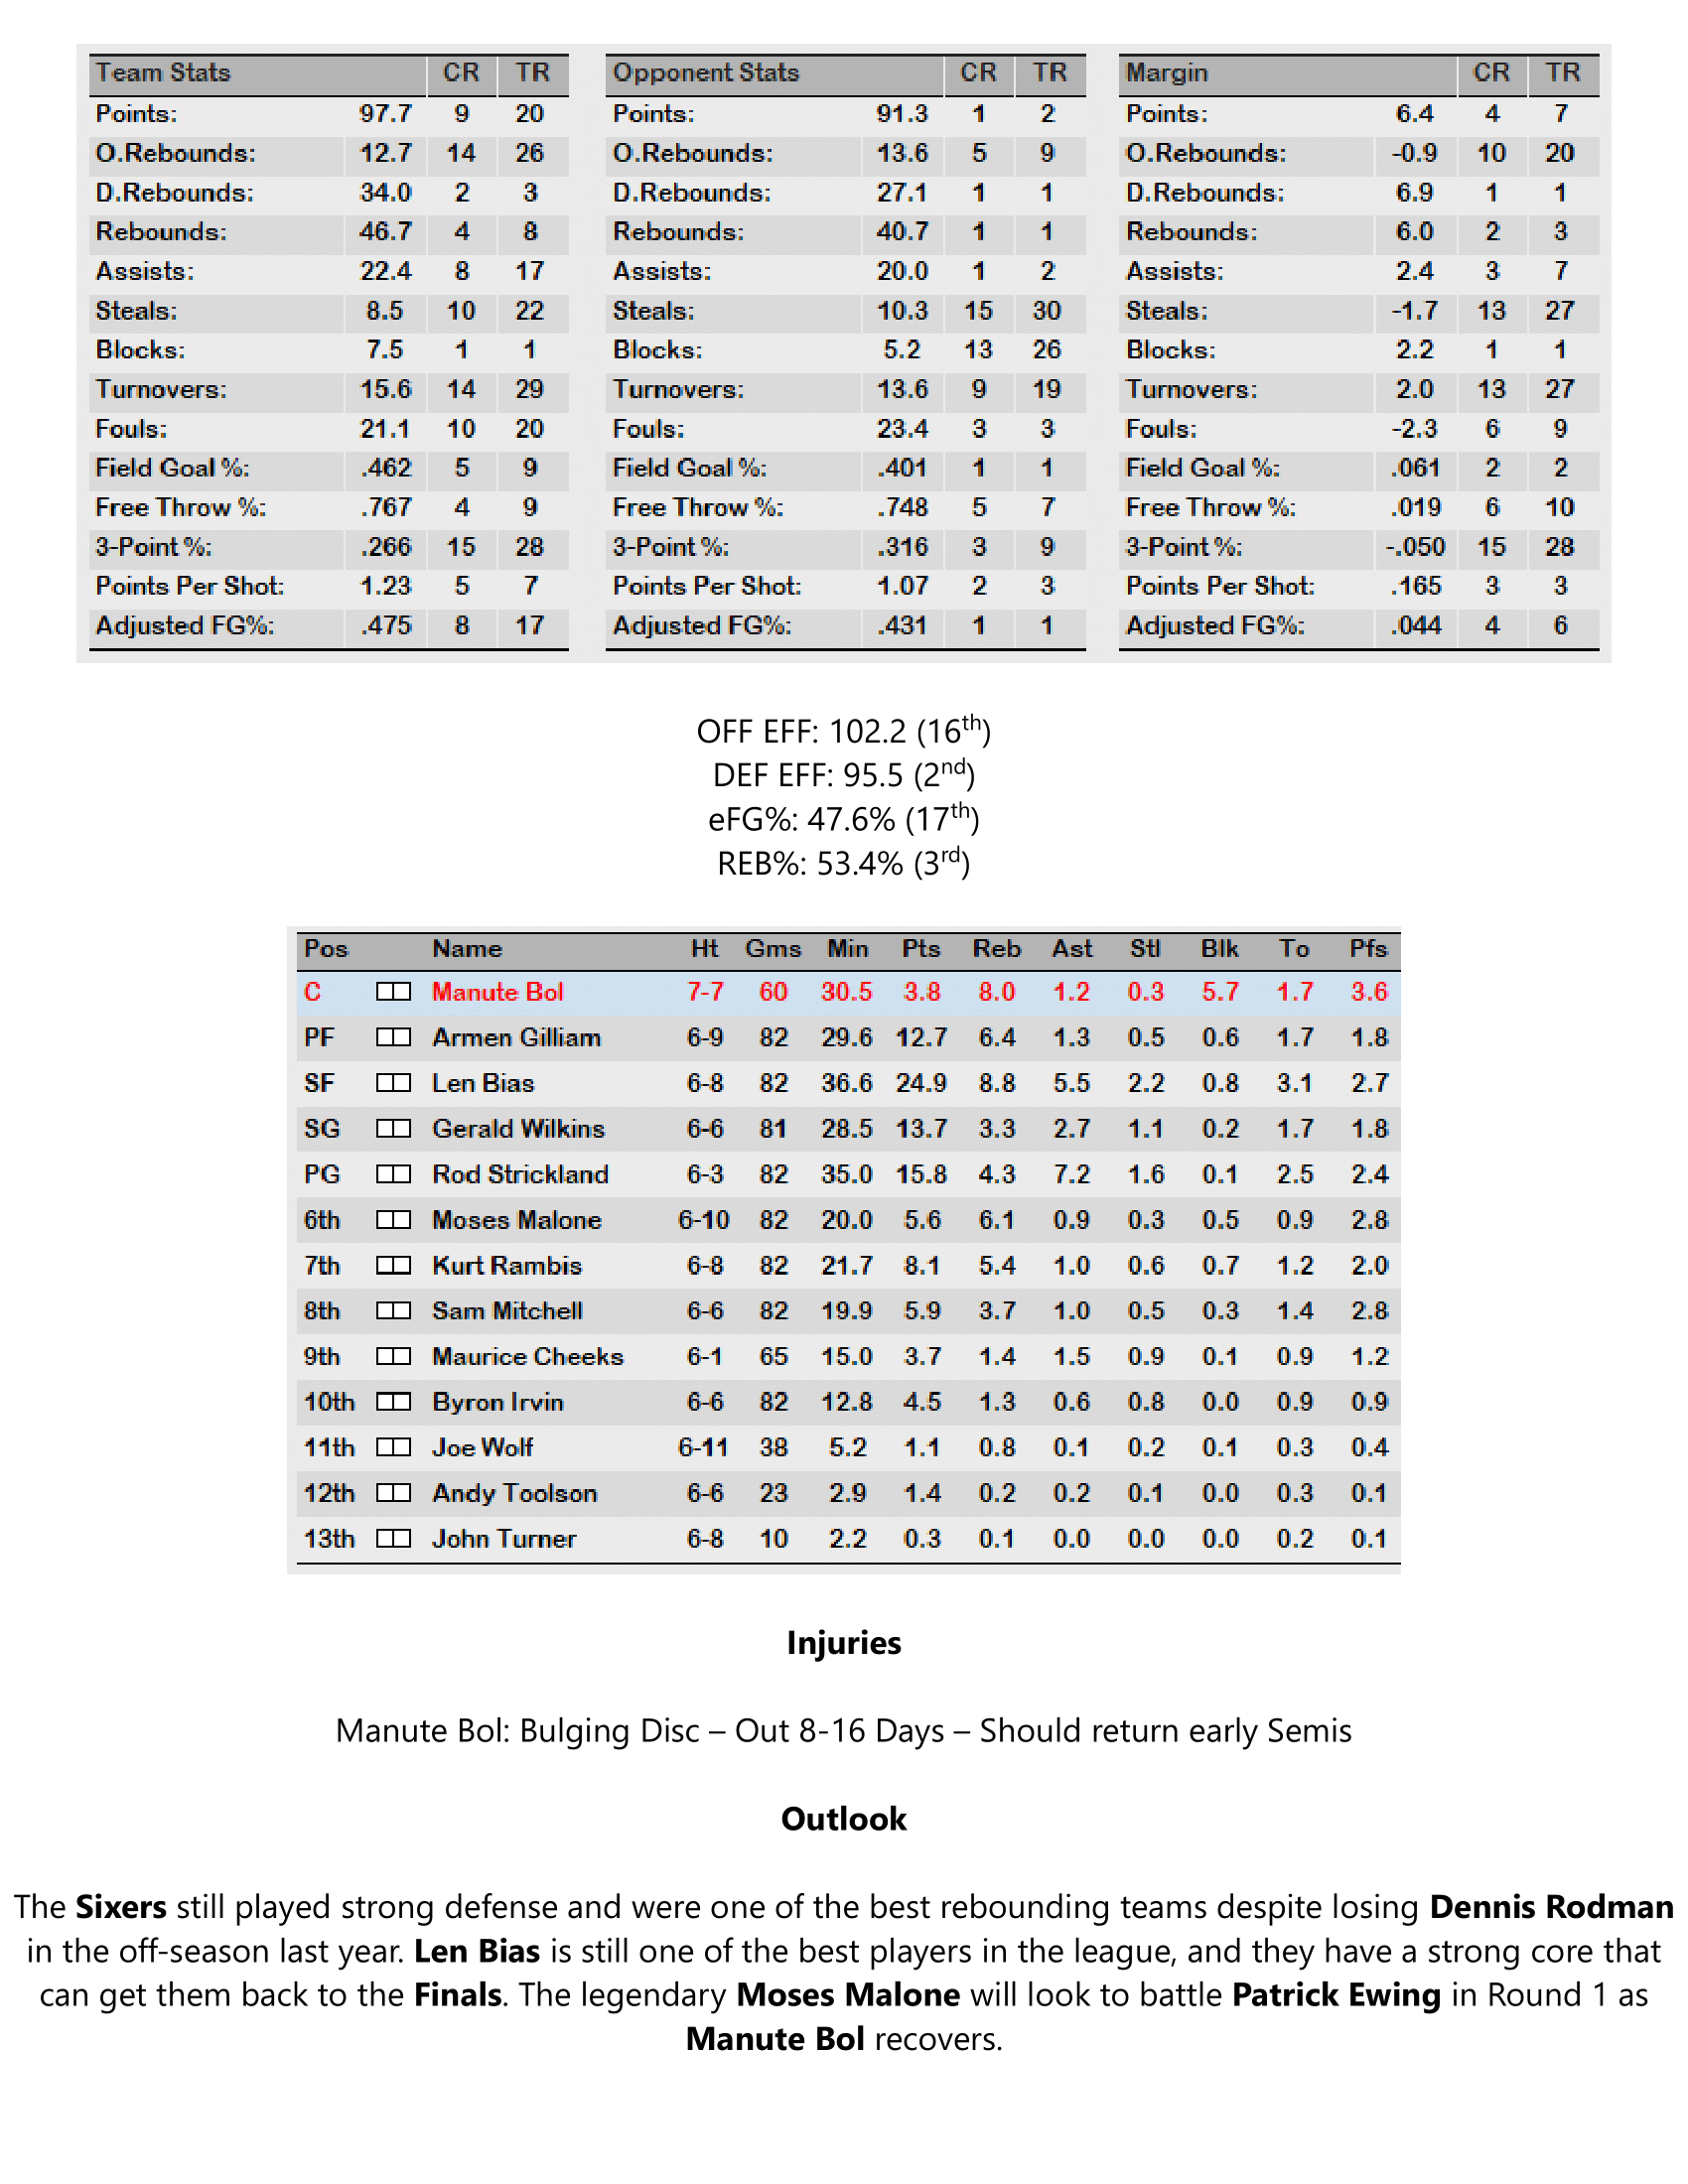 91-92-Part-4-Playoff-Preview-19.png